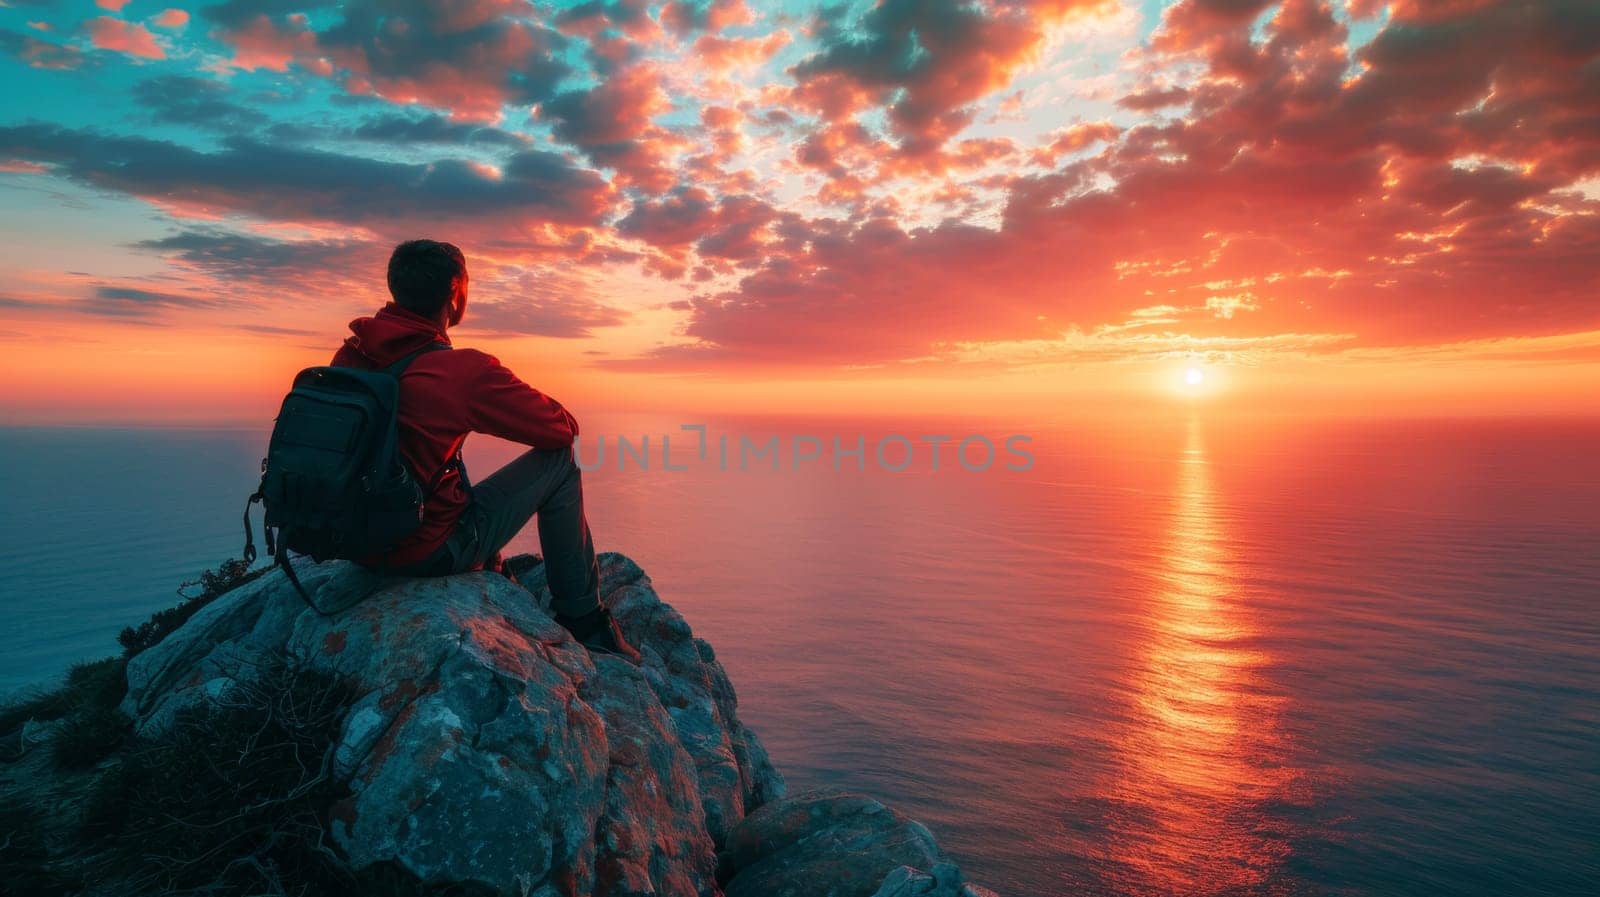 A man sitting on a rock overlooking the ocean at sunset, AI by starush